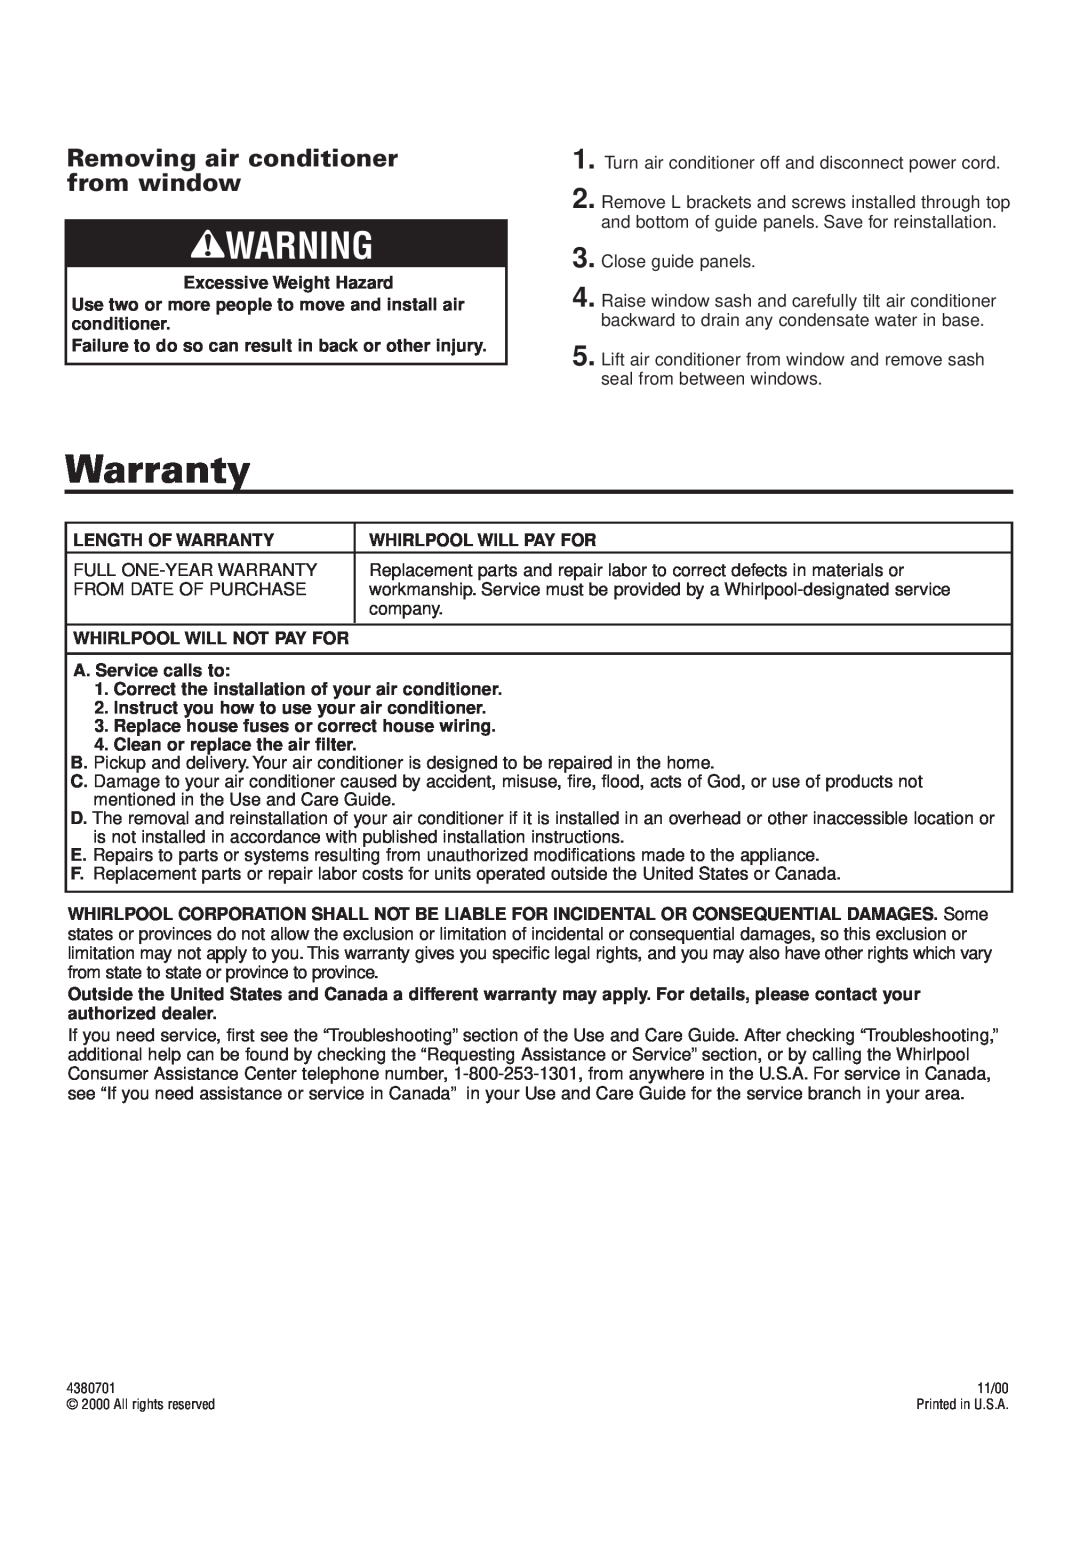 Whirlpool RA51K0 installation instructions Warranty, Removing air conditioner from window 